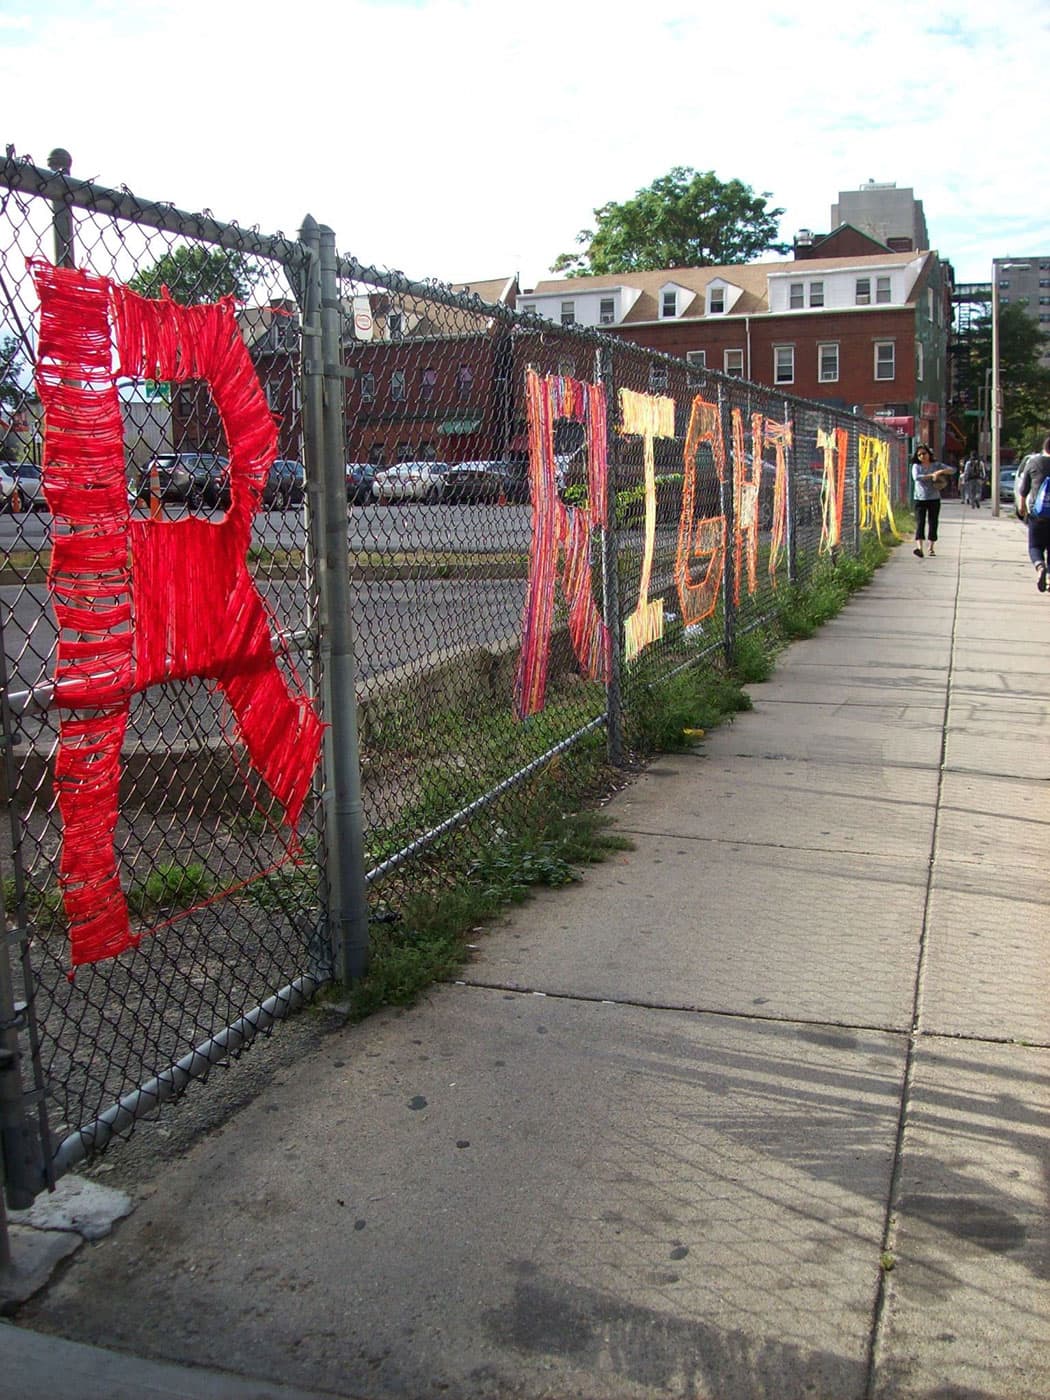 Yarn-bombing spells out "R Right to Remain" along a fence at 56 Tyler St., Boston. (Courtesy)